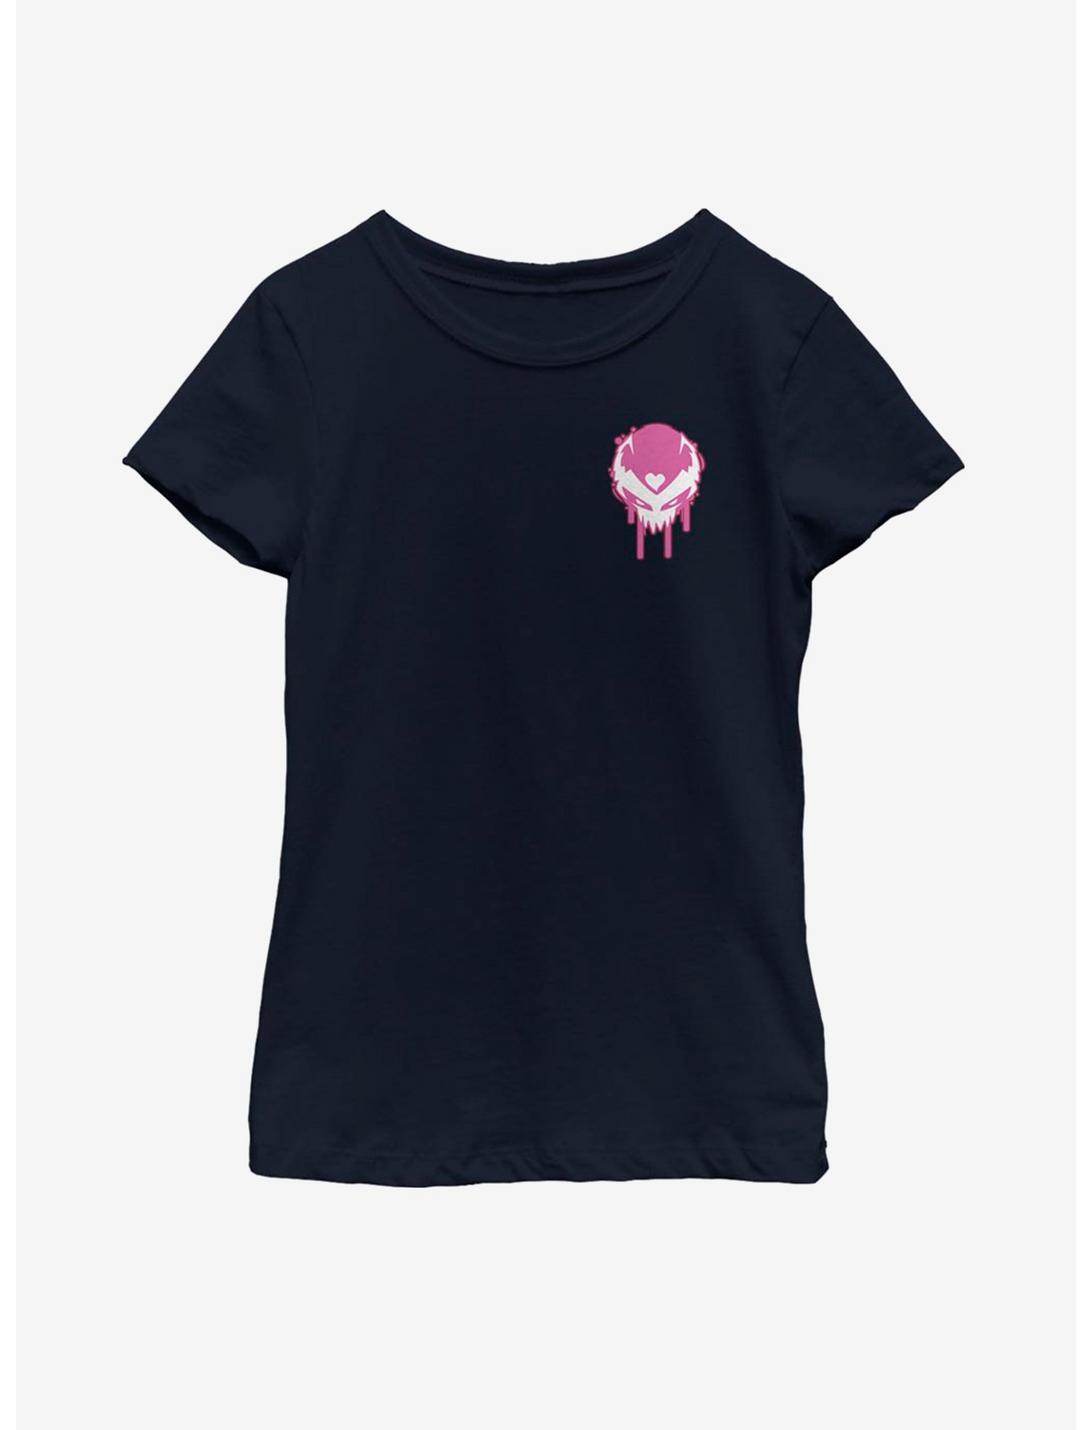 Marvel Venomized Pink Icon Drip Youth Girls T-Shirt, NAVY, hi-res